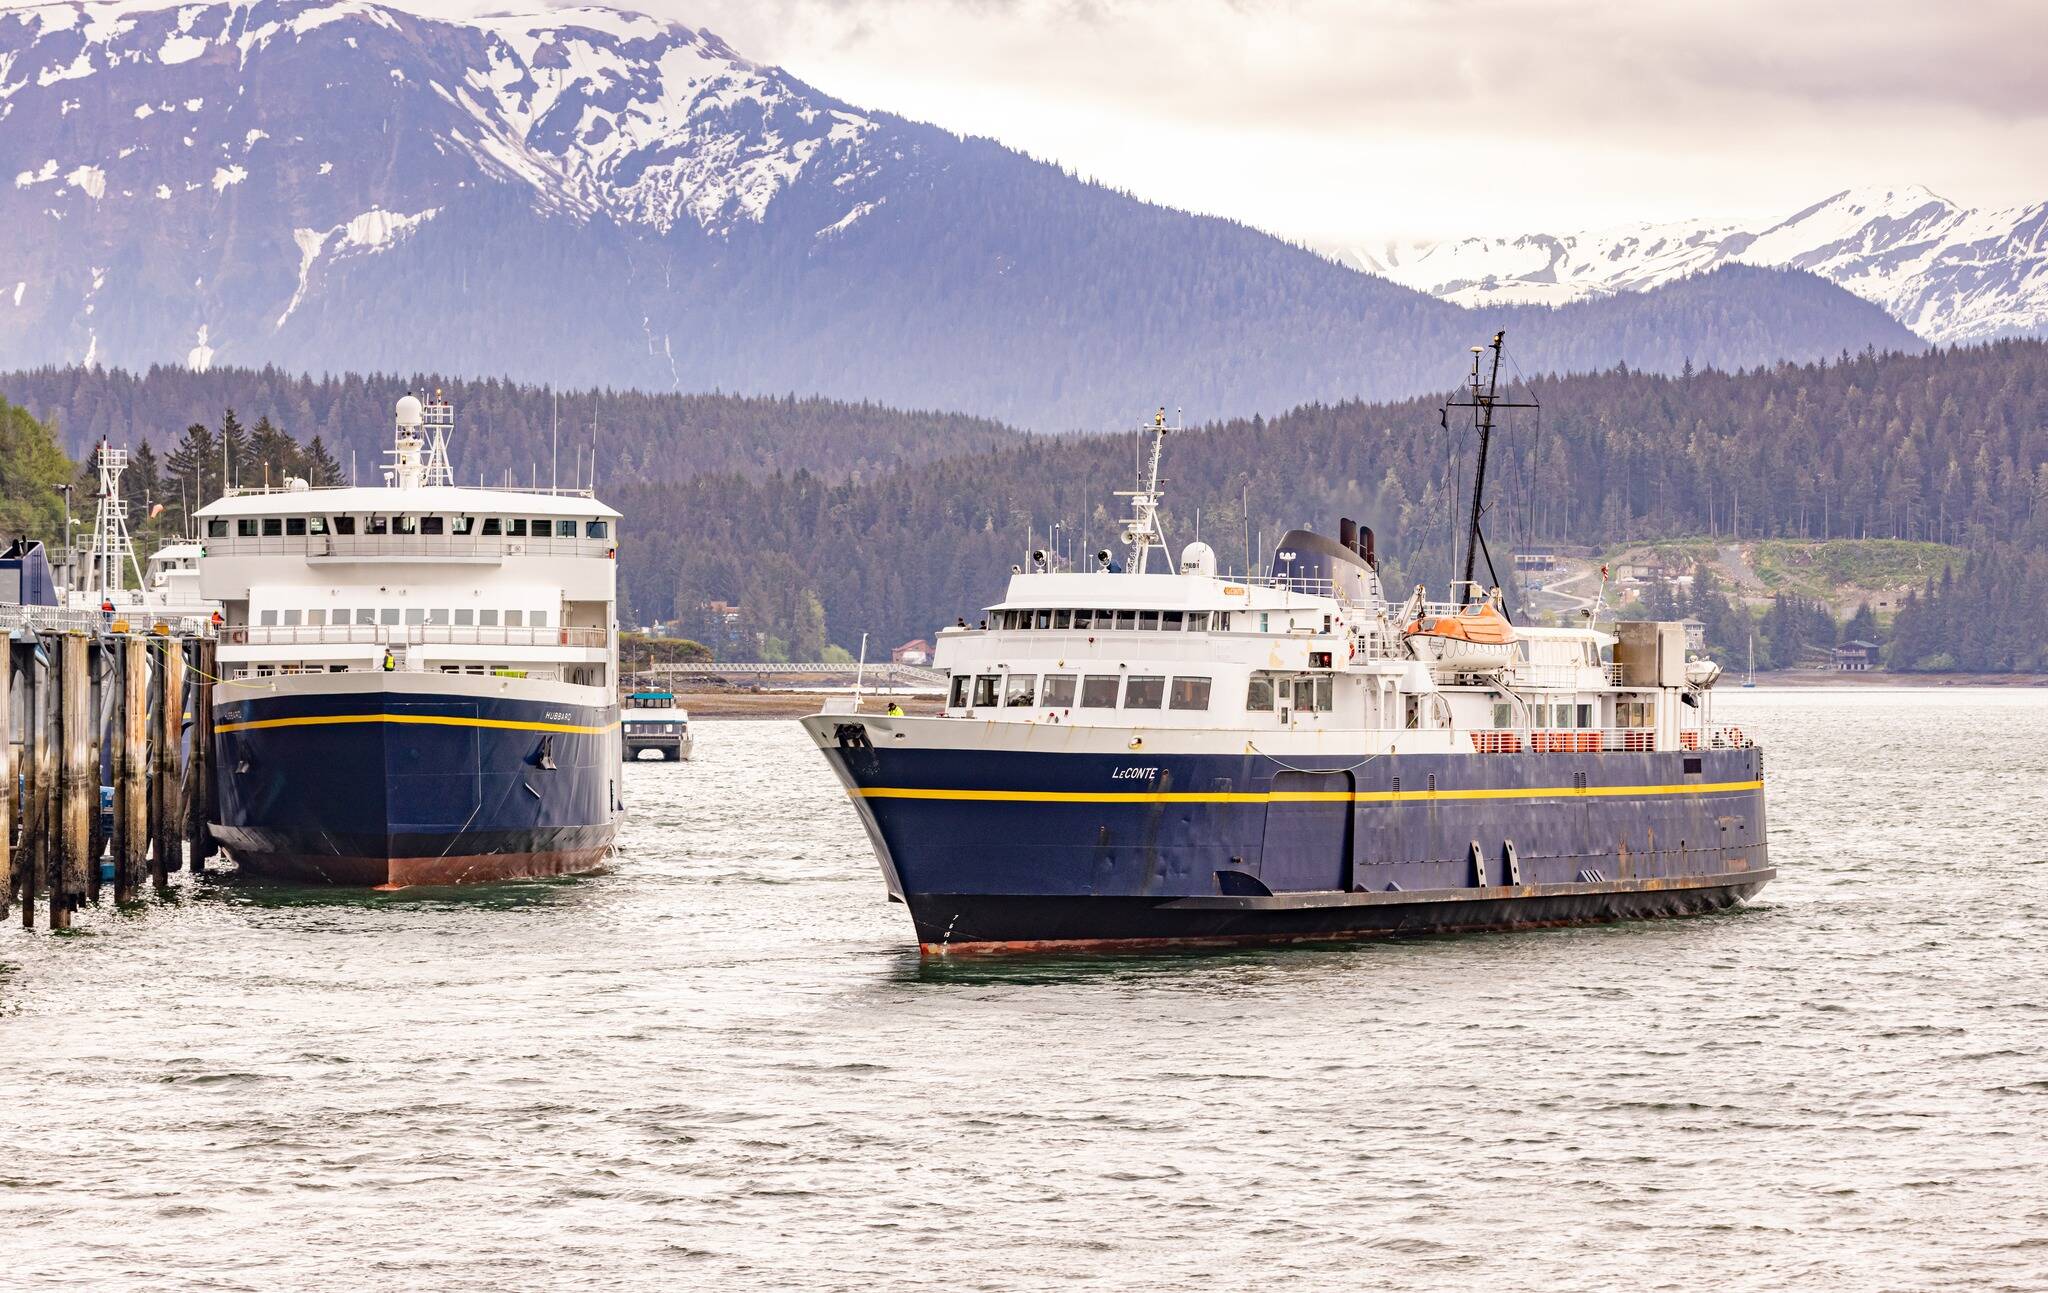 The Hubbard and LeConte ferries are seen at a Southeast Alaska port in this picture published June 1. (Photo courtesy of the Alaska Marine Highway System)